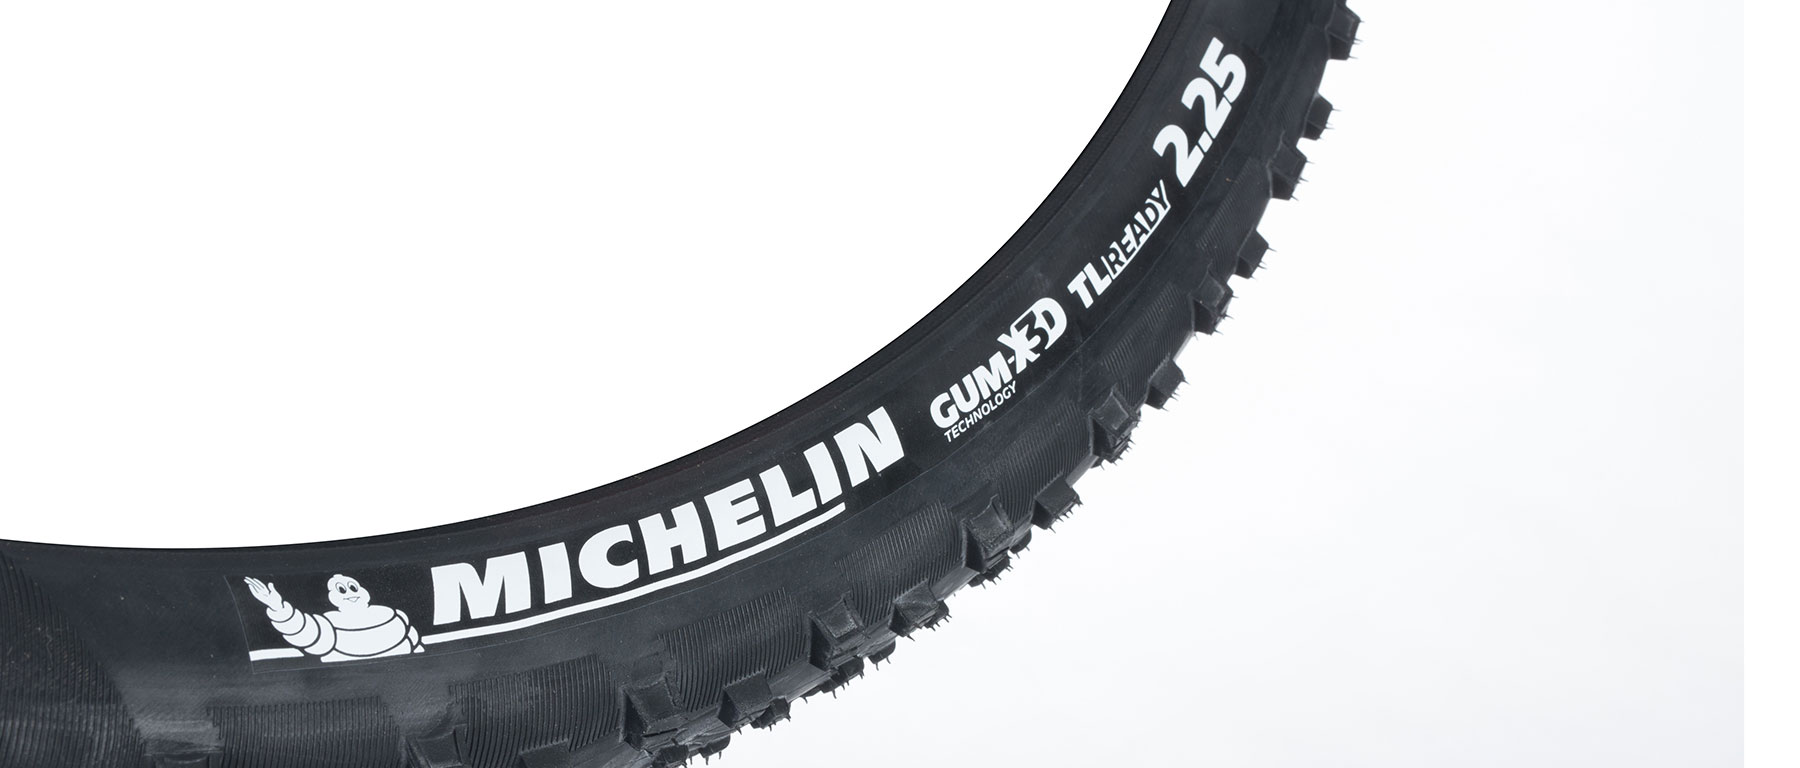 Michelin Force XC Tire